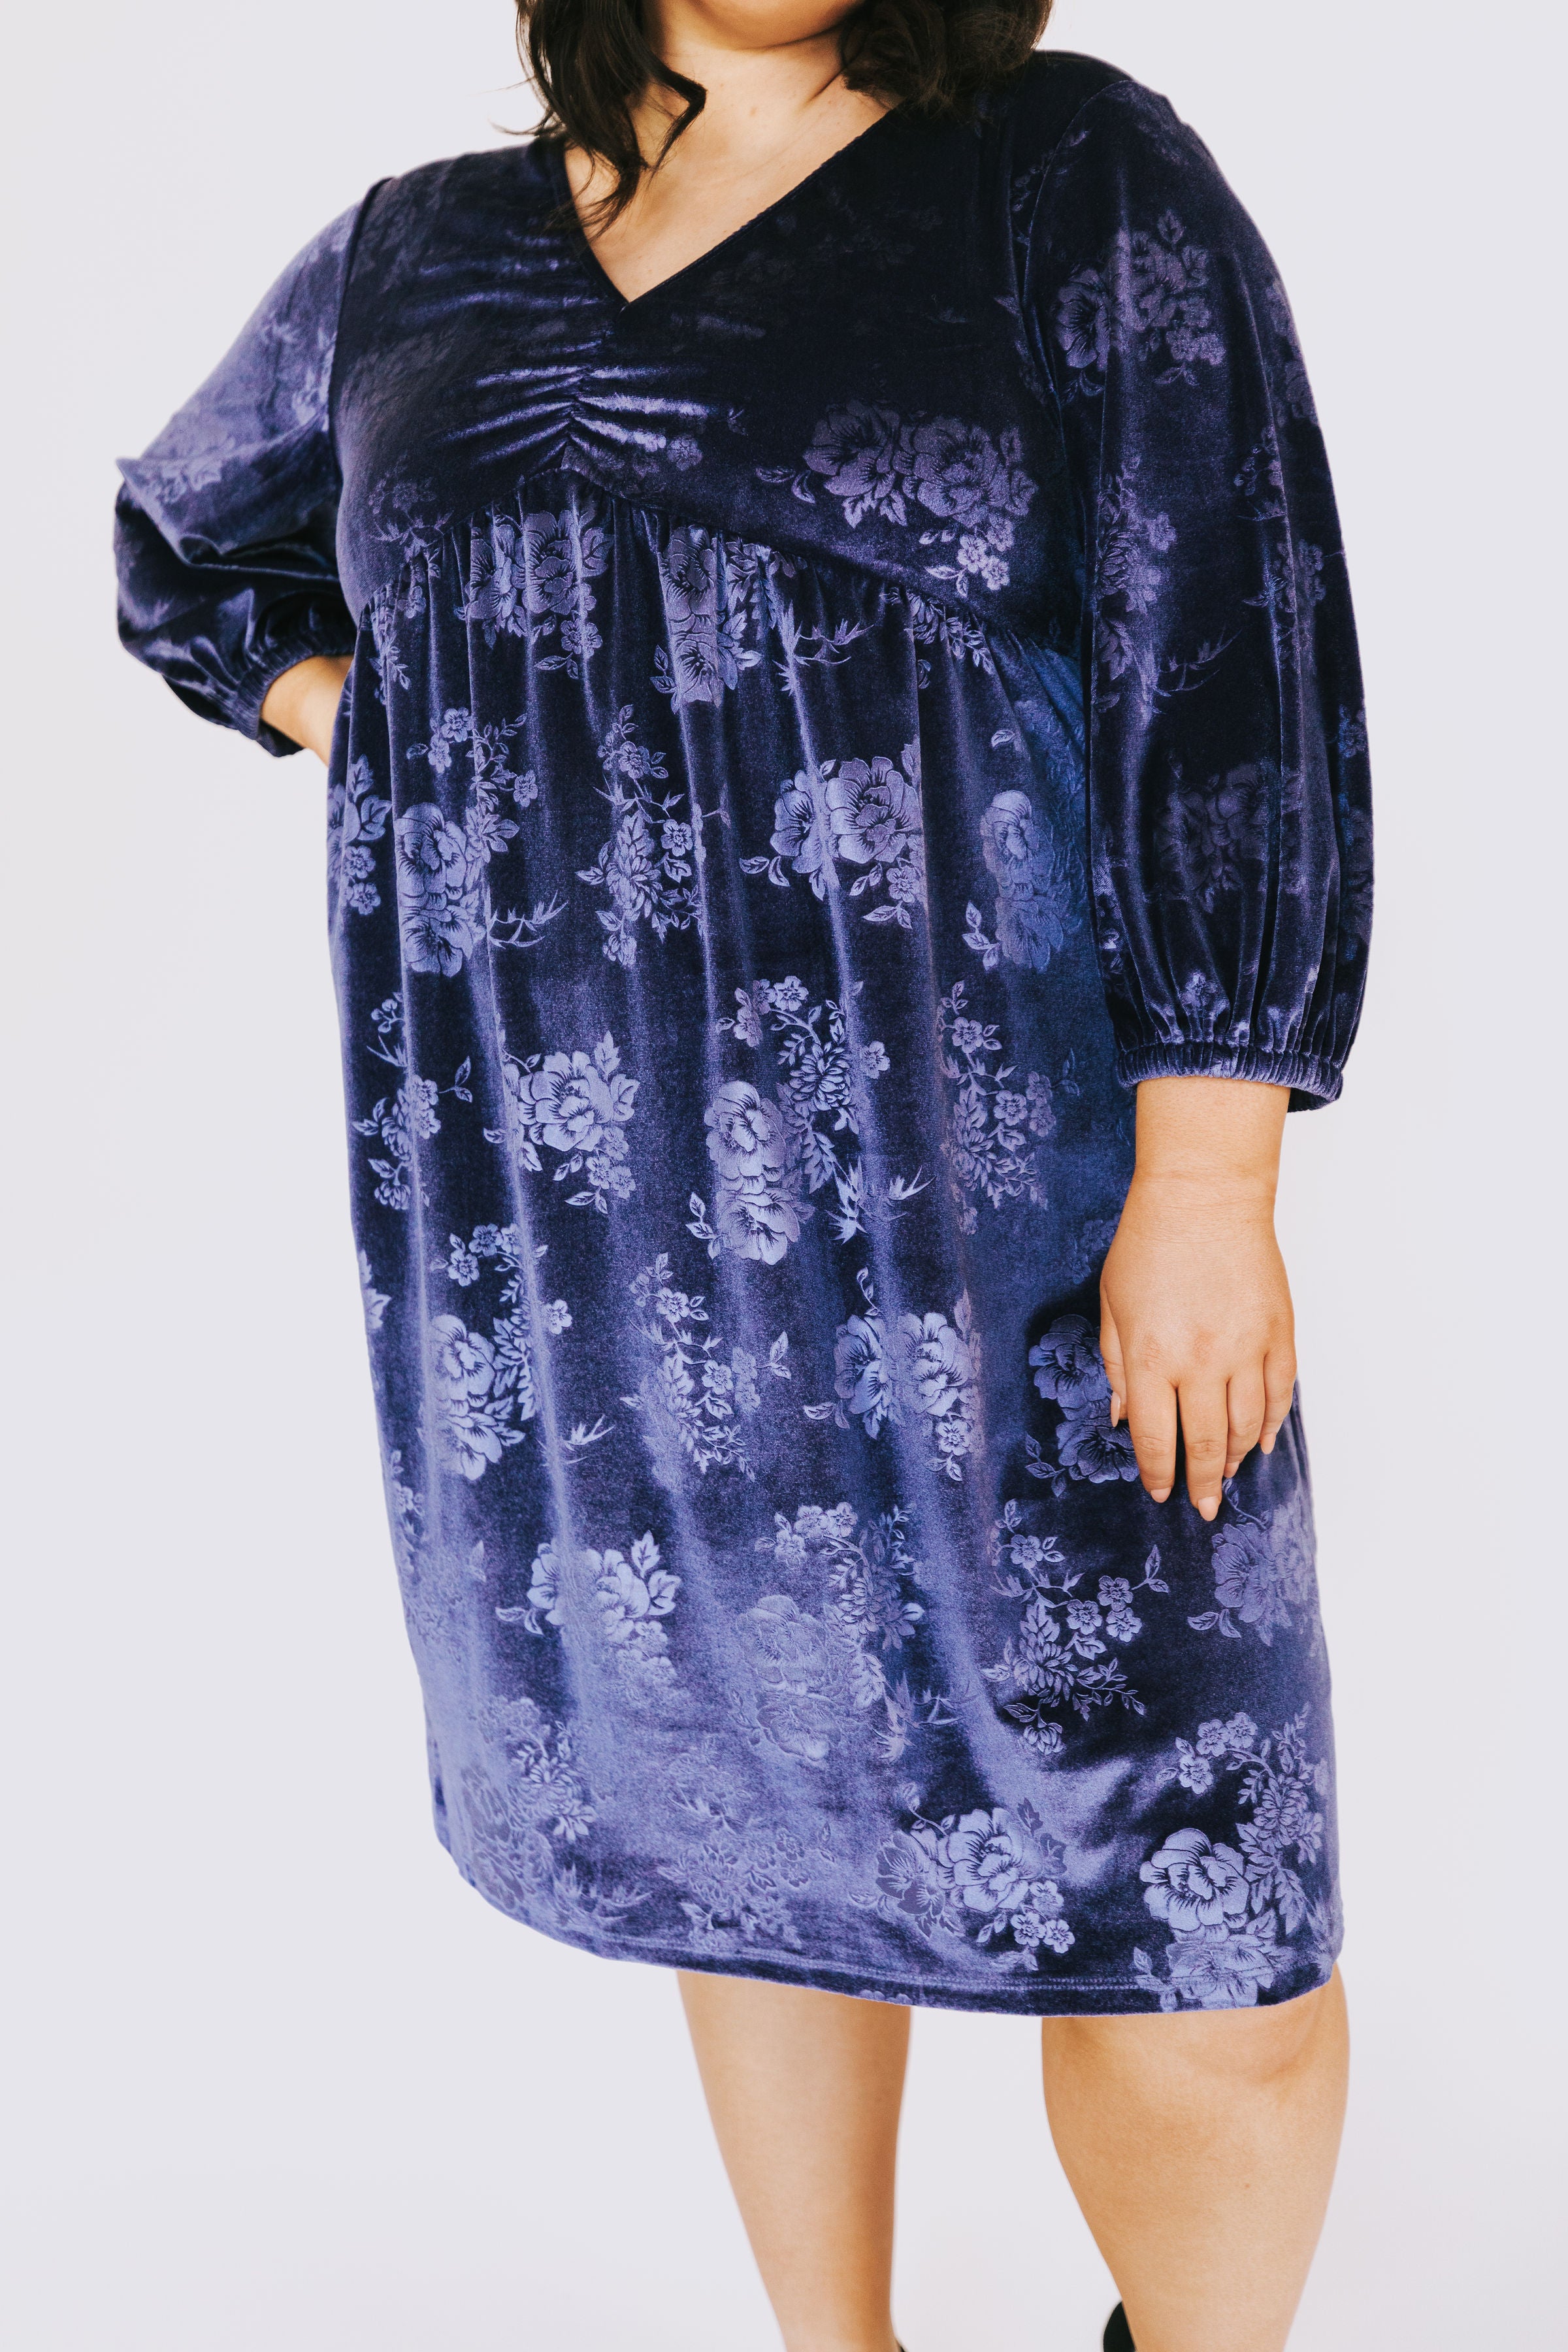 PLUS SIZE - Candle In The Wind Dress